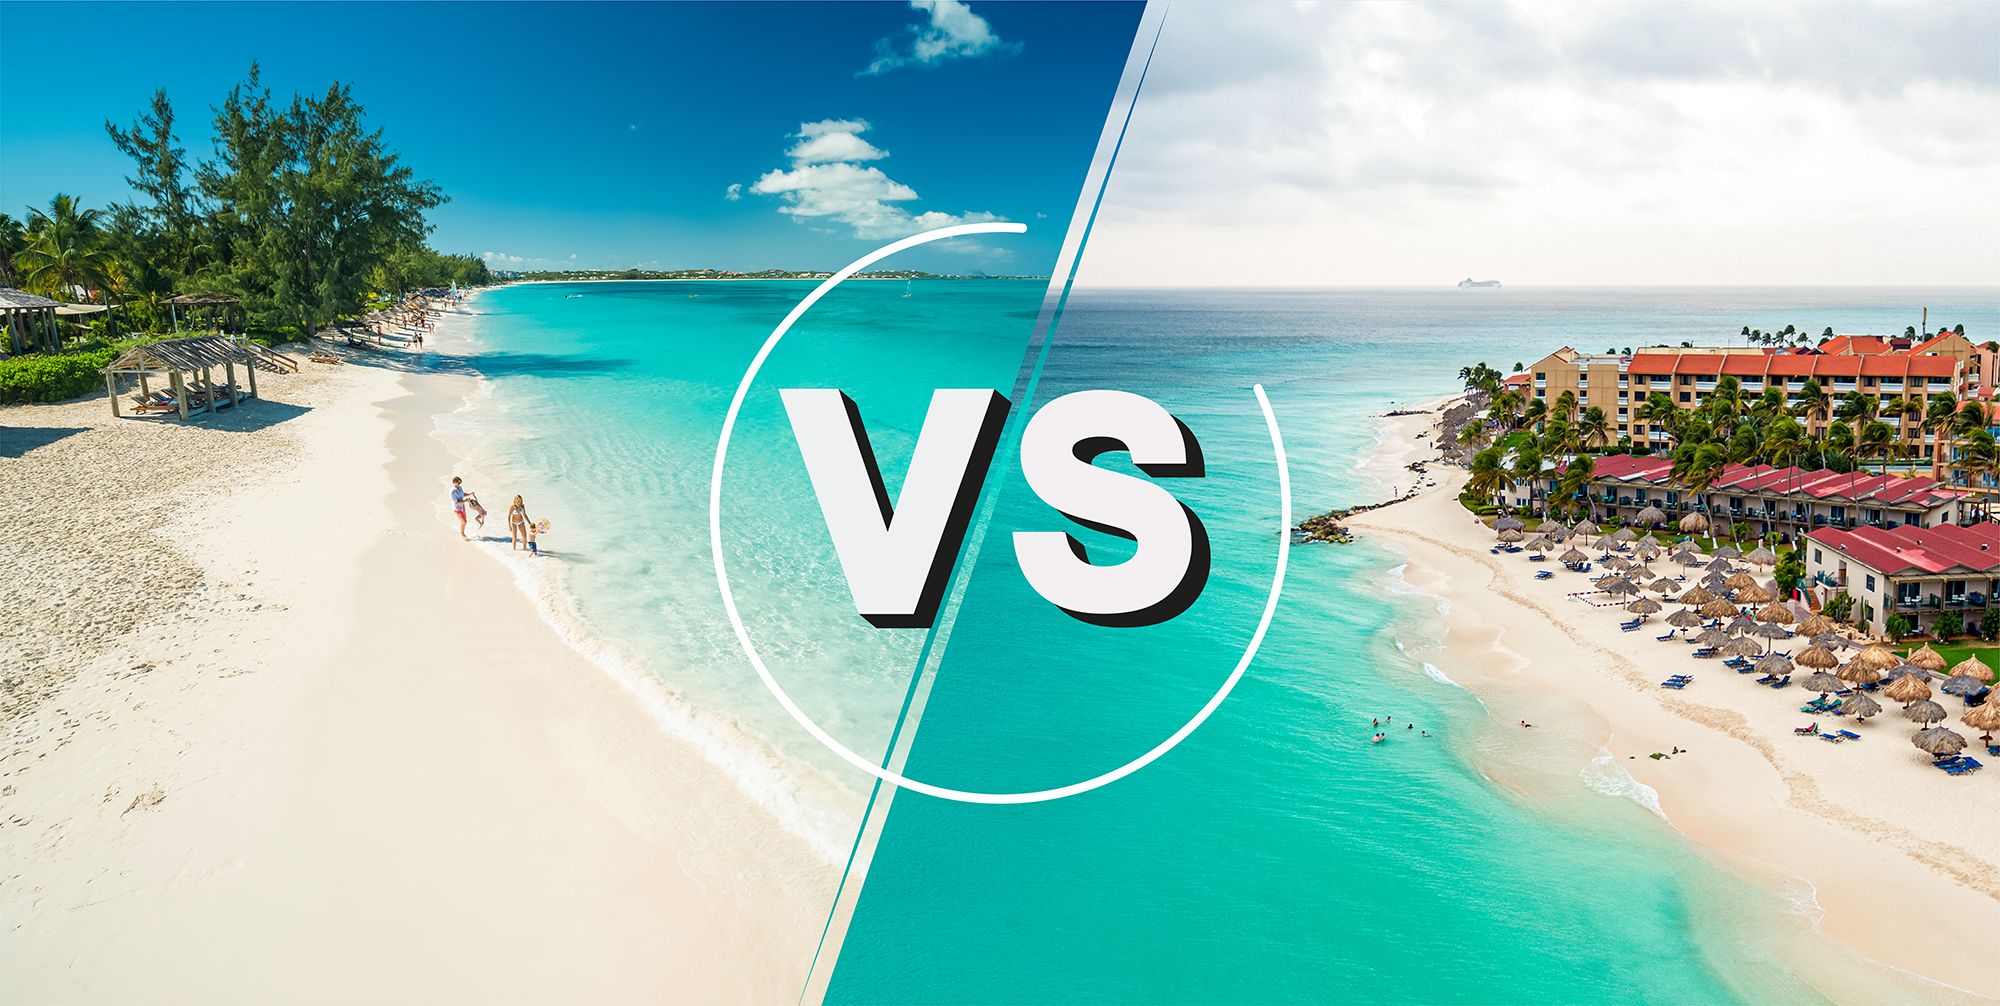 Canâ€™t Choose Between Turks & Caicos and Aruba? We Are Here To Help!